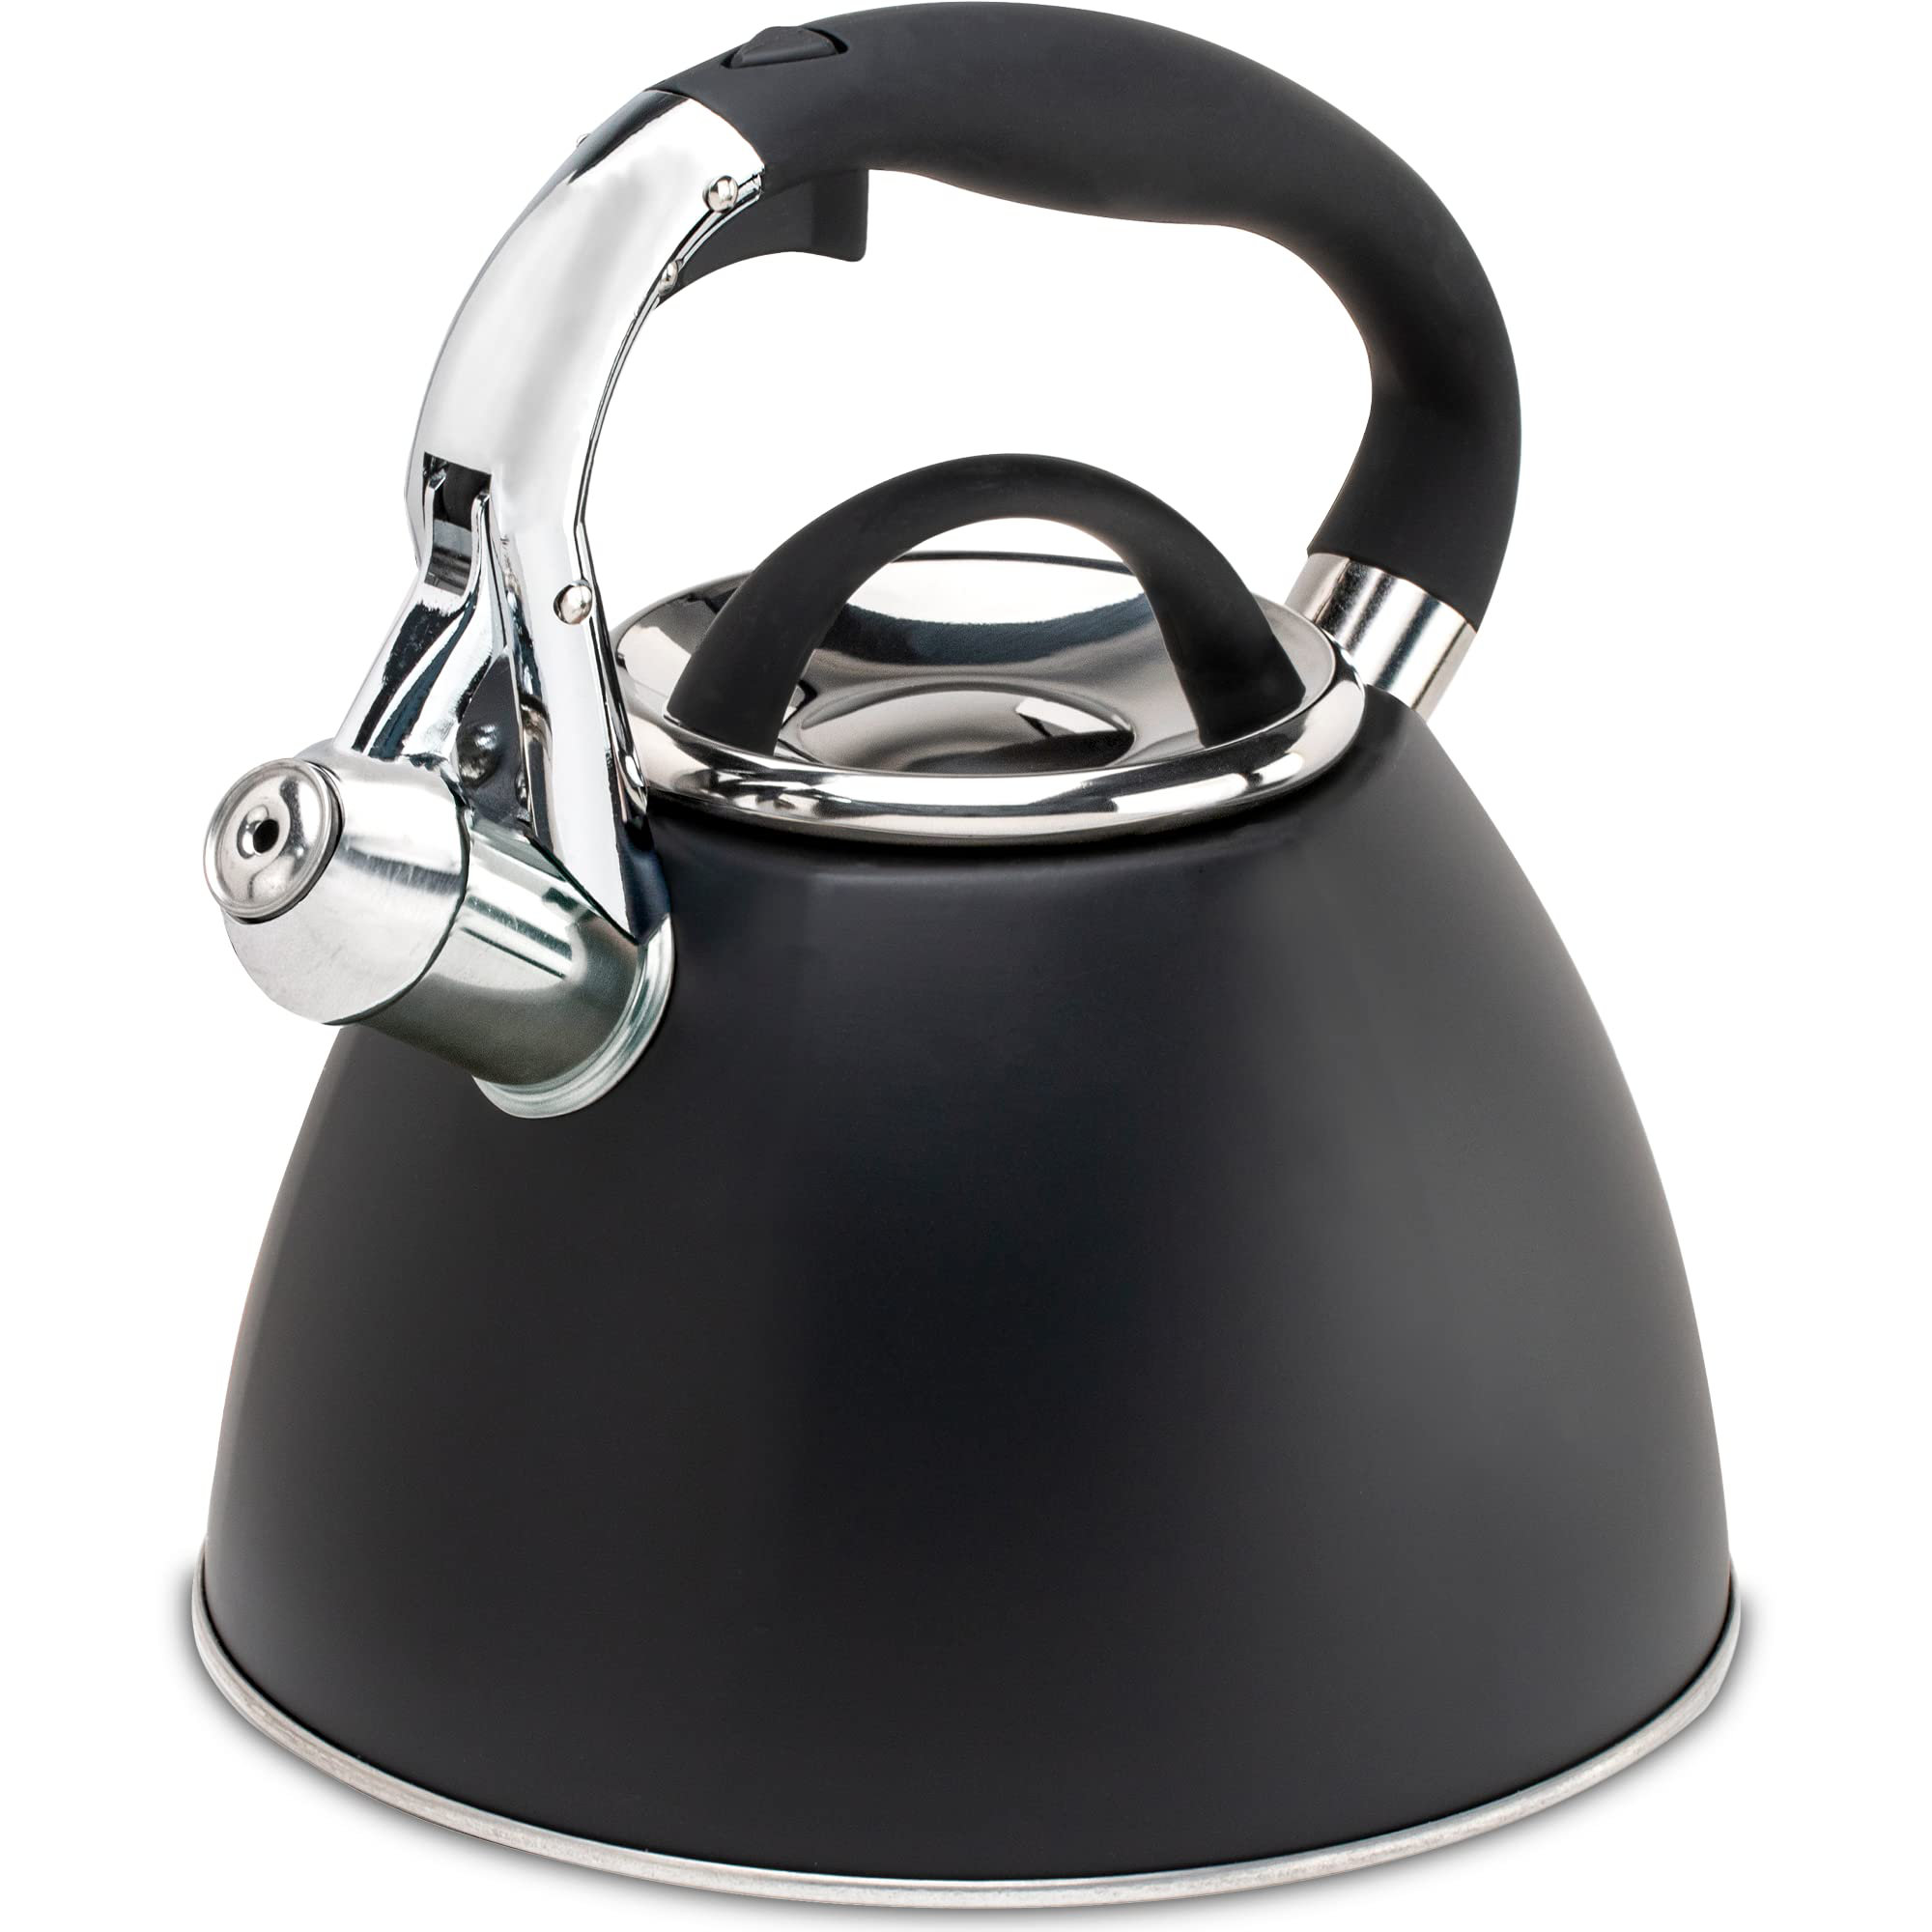  Stovetop Tea Kettle Whistling Teapot Tea Kettle 3L Stainless  Steel Whistling Kettle With Handle Large Capacity Tea Kettle Simple Solid  Color Water Kettle Stove Top Kettle Tea Pot ( Color 